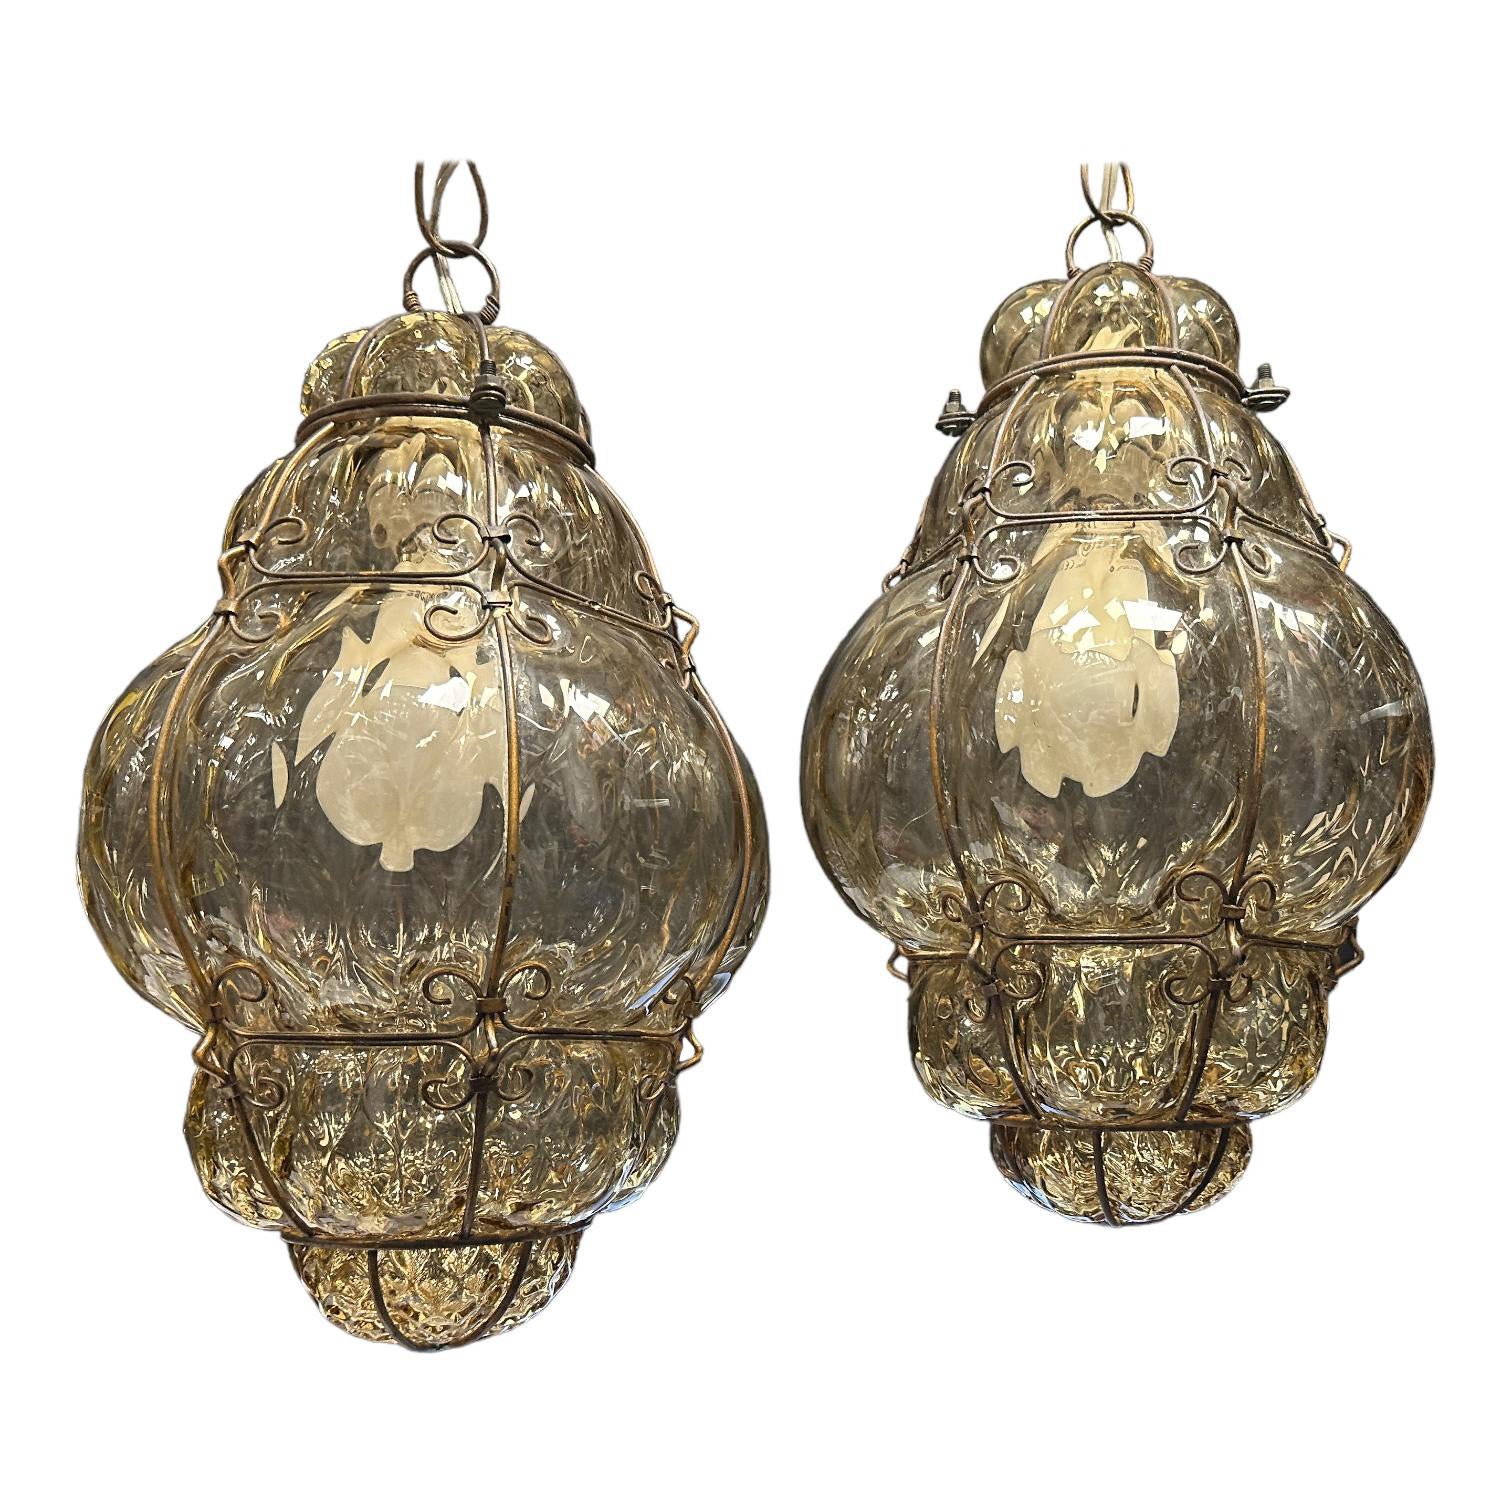 Pair of Petite Murano Caged Glass Pendant Light, 1930s Italy vintage For Sale